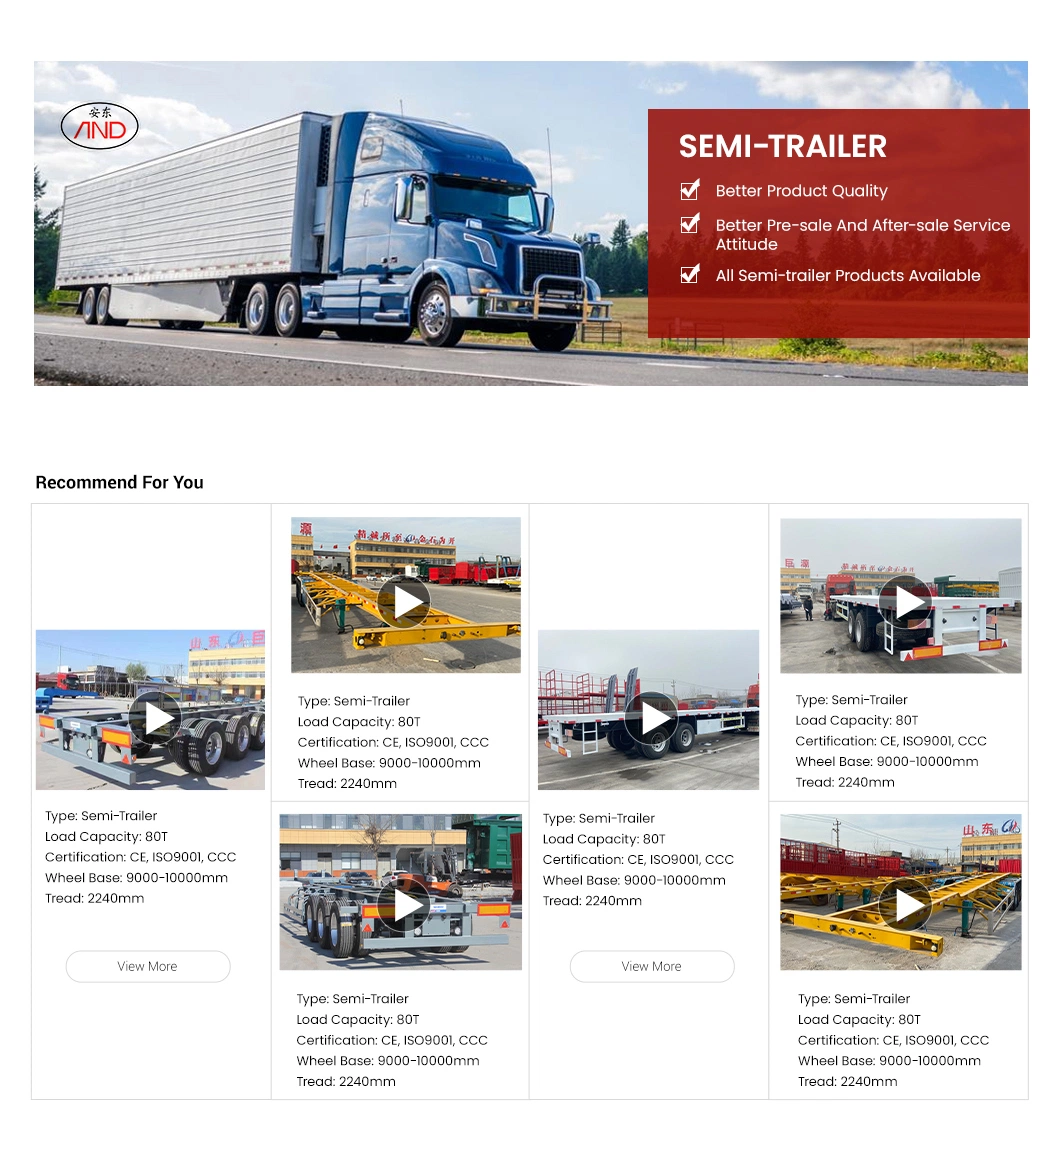 Anton&prime;s Main Truck Trailers Goods Transport Vehicles, in The New Shaft, Hook Machine Plate Export Production